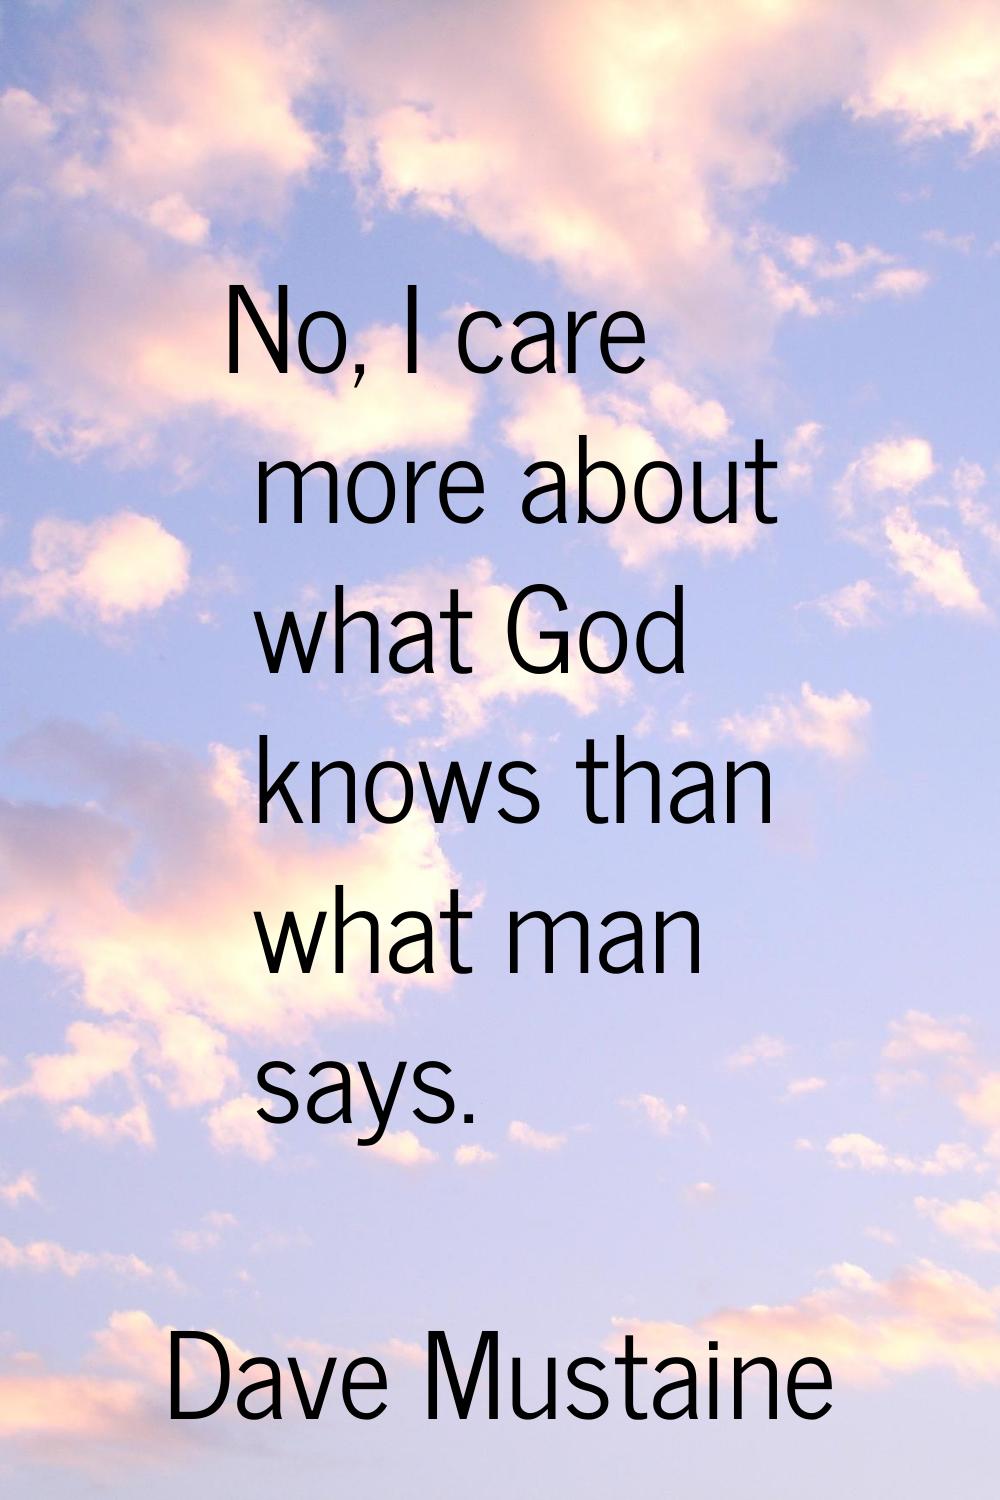 No, I care more about what God knows than what man says.